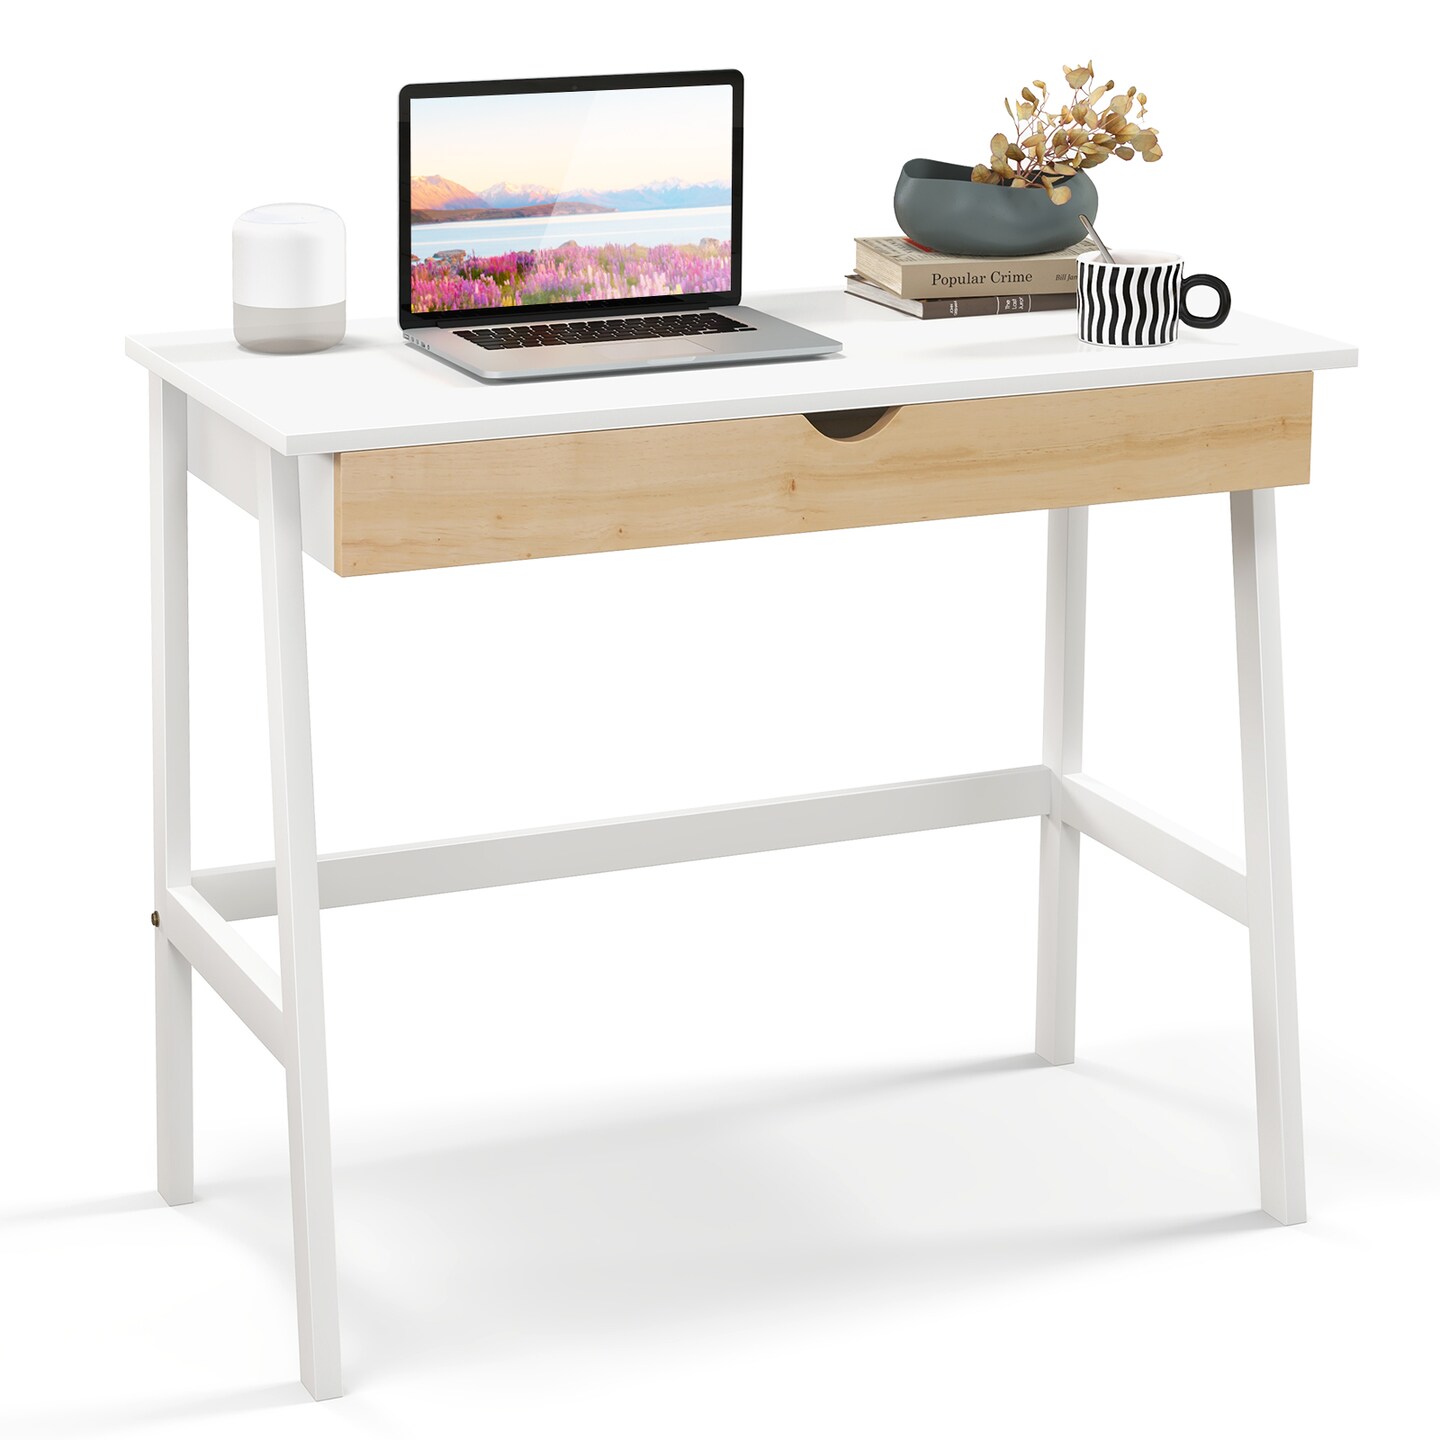 Wooden Computer Desk With Drawer For Home Office